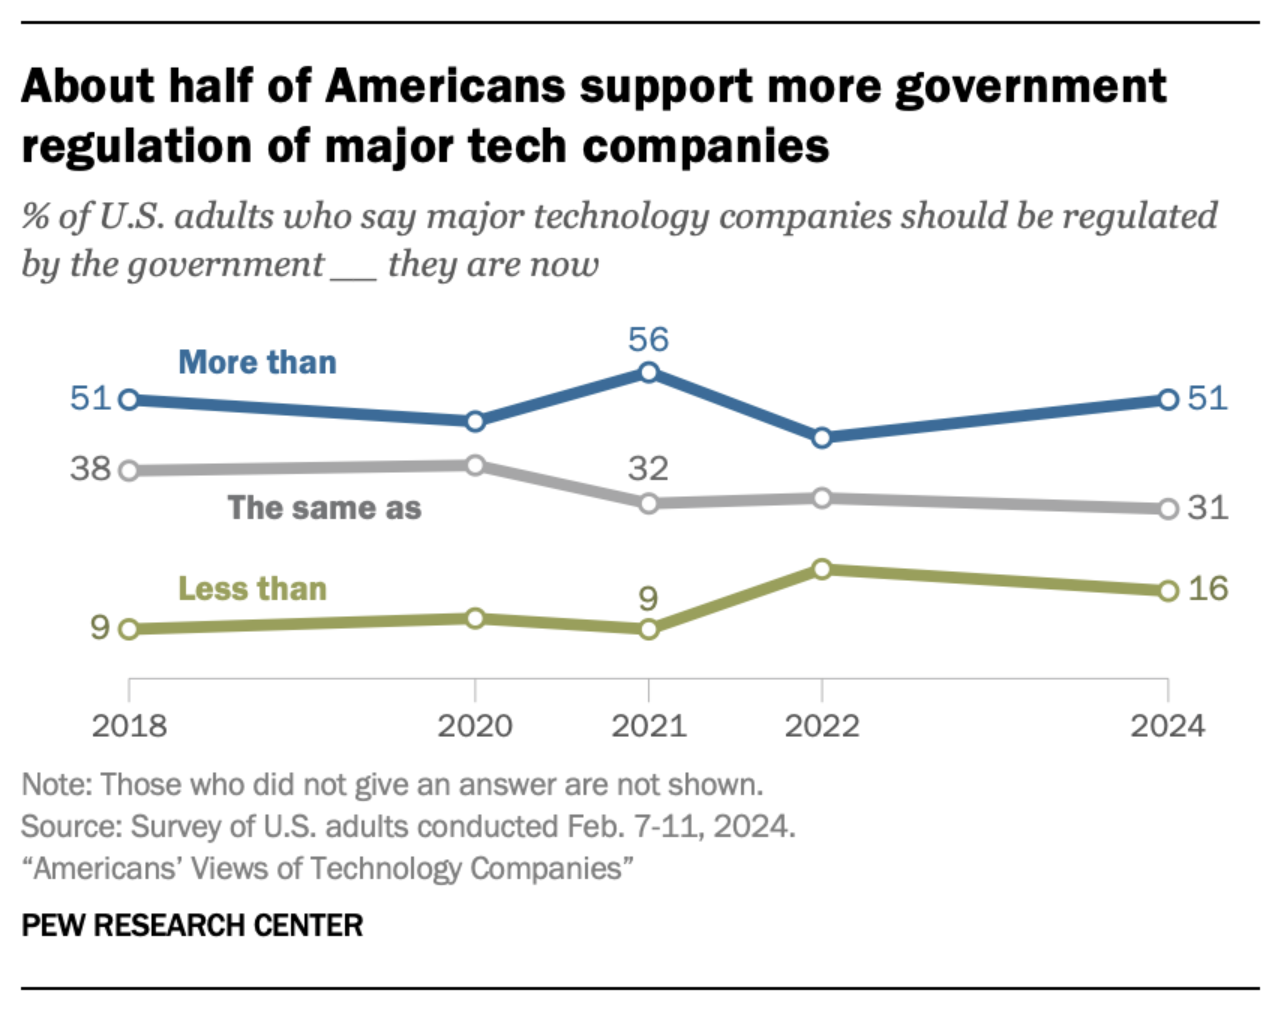 Pew Research Center finds about half of Americans support government regulation of major tech companies